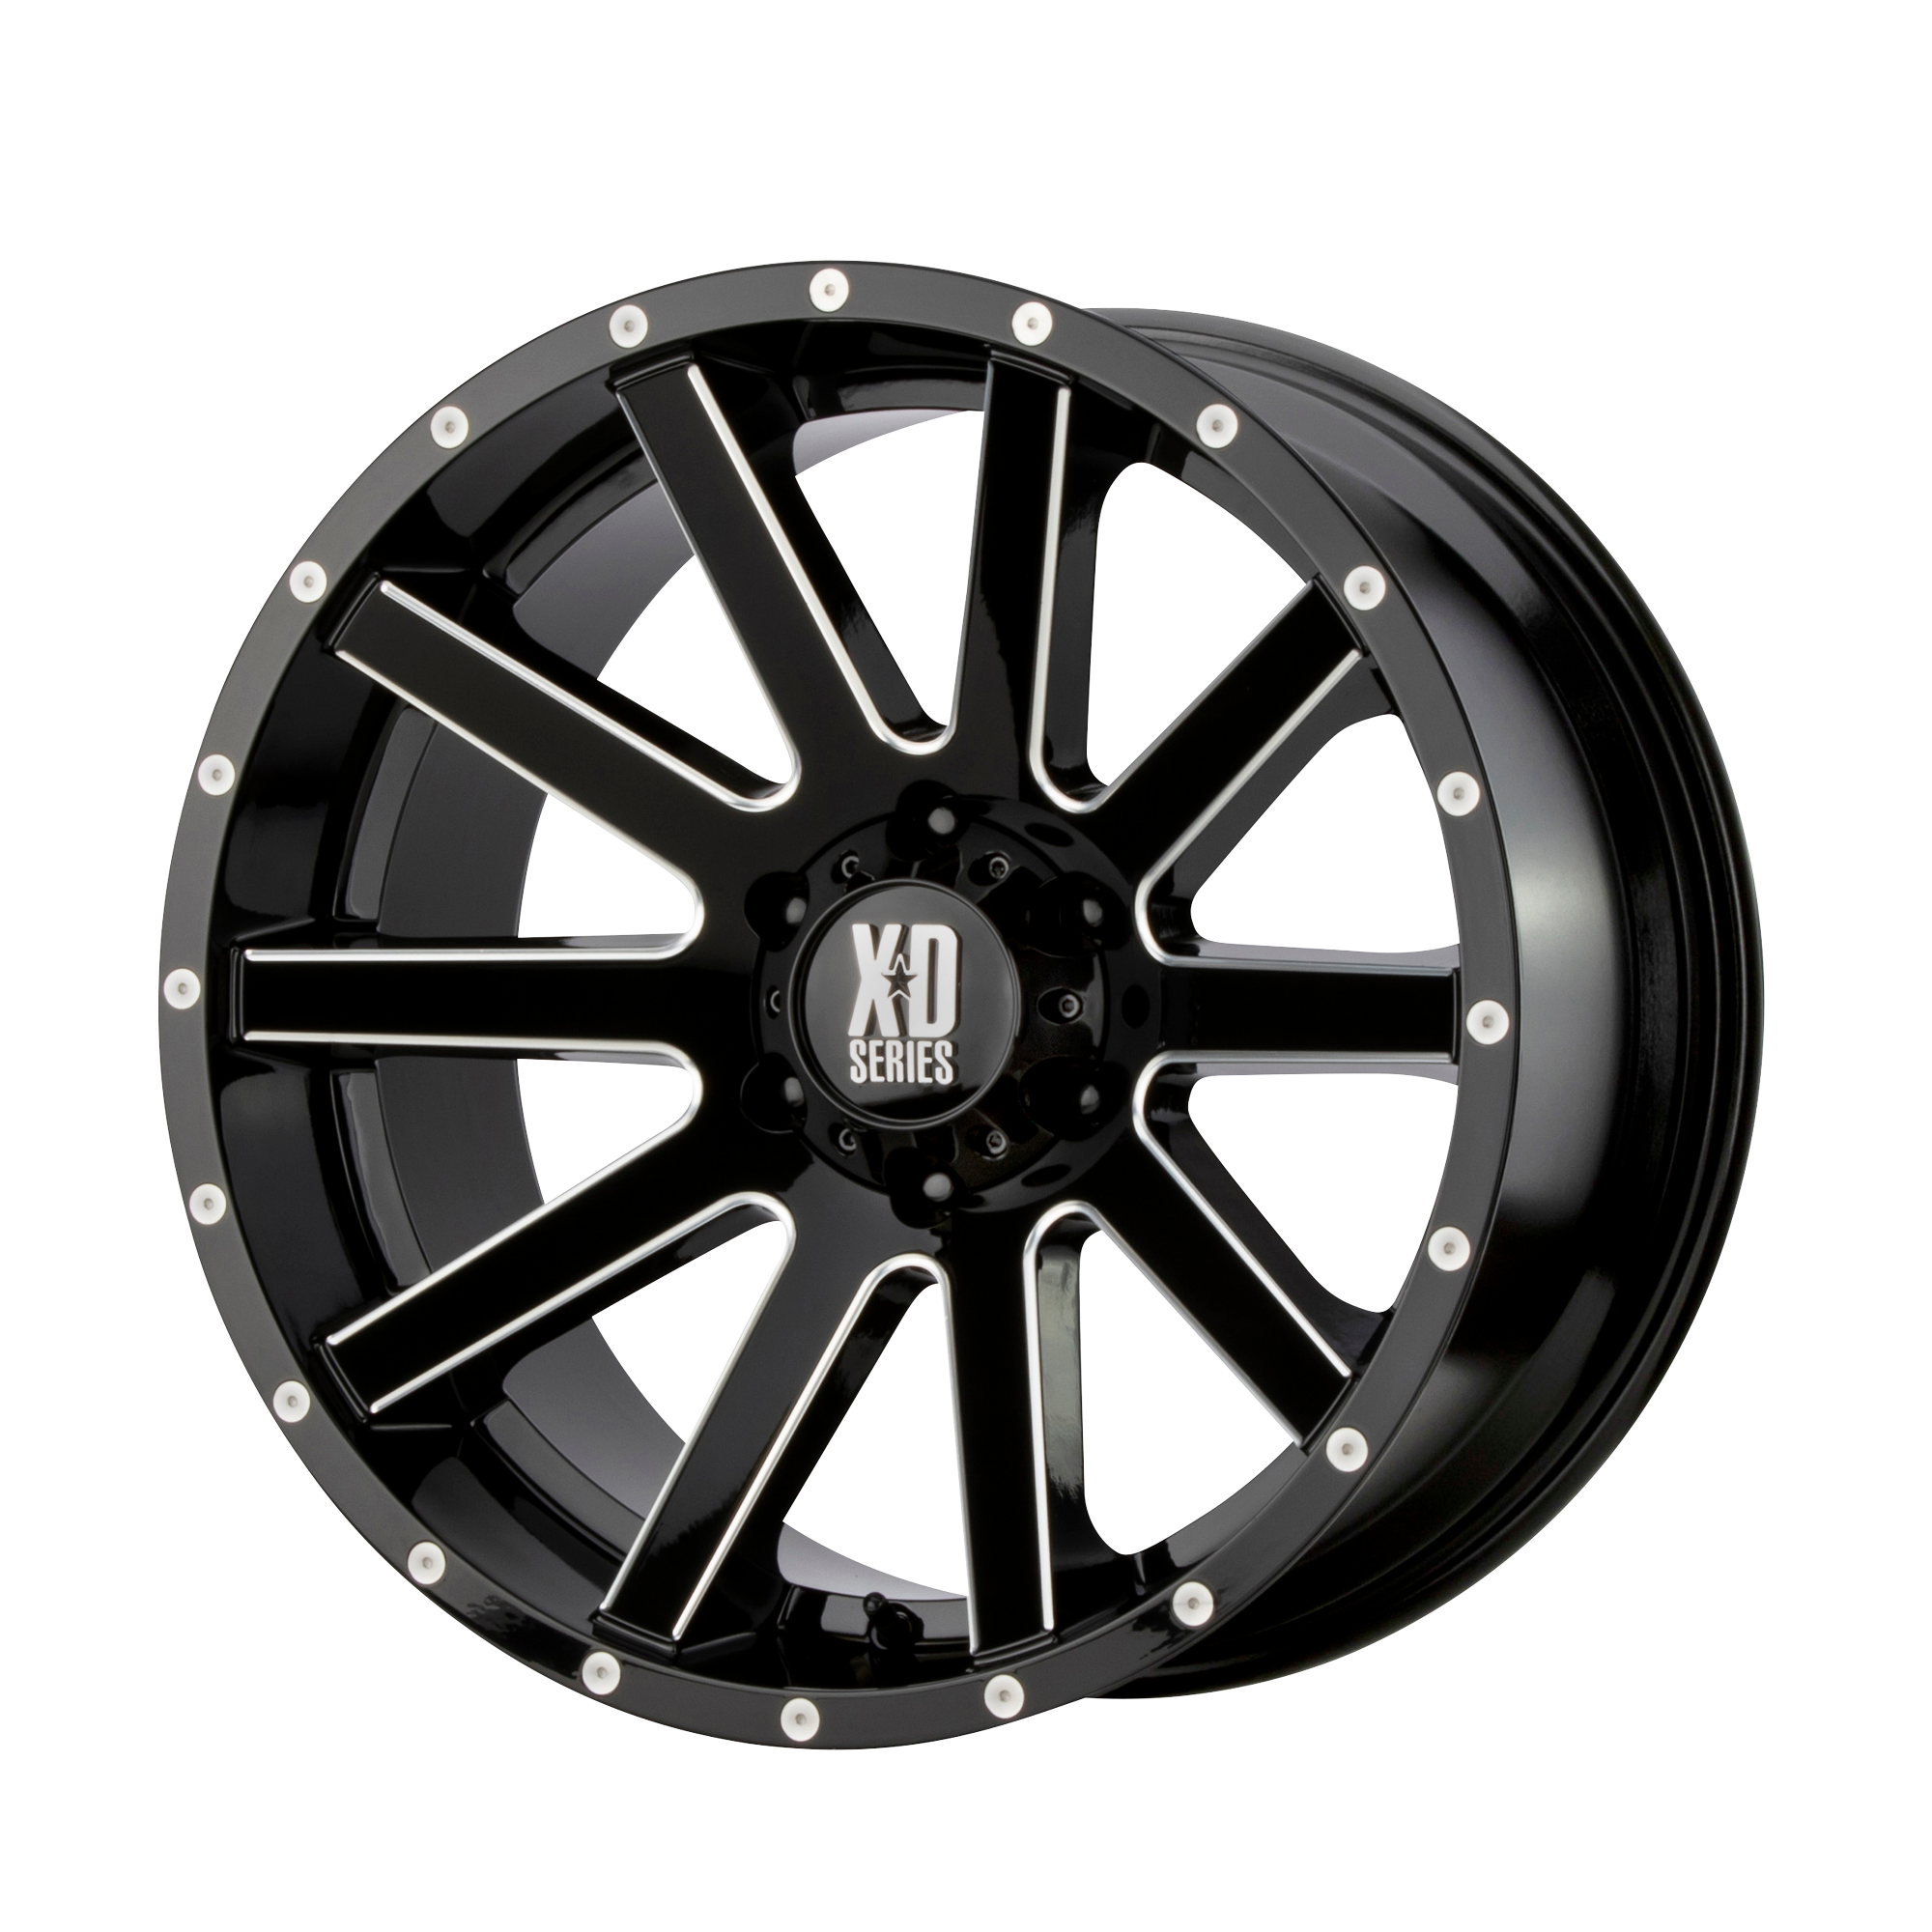 HEIST 16x8 6x114.30 GLOSS BLACK MILLED (10 mm) - Tires and Engine Performance